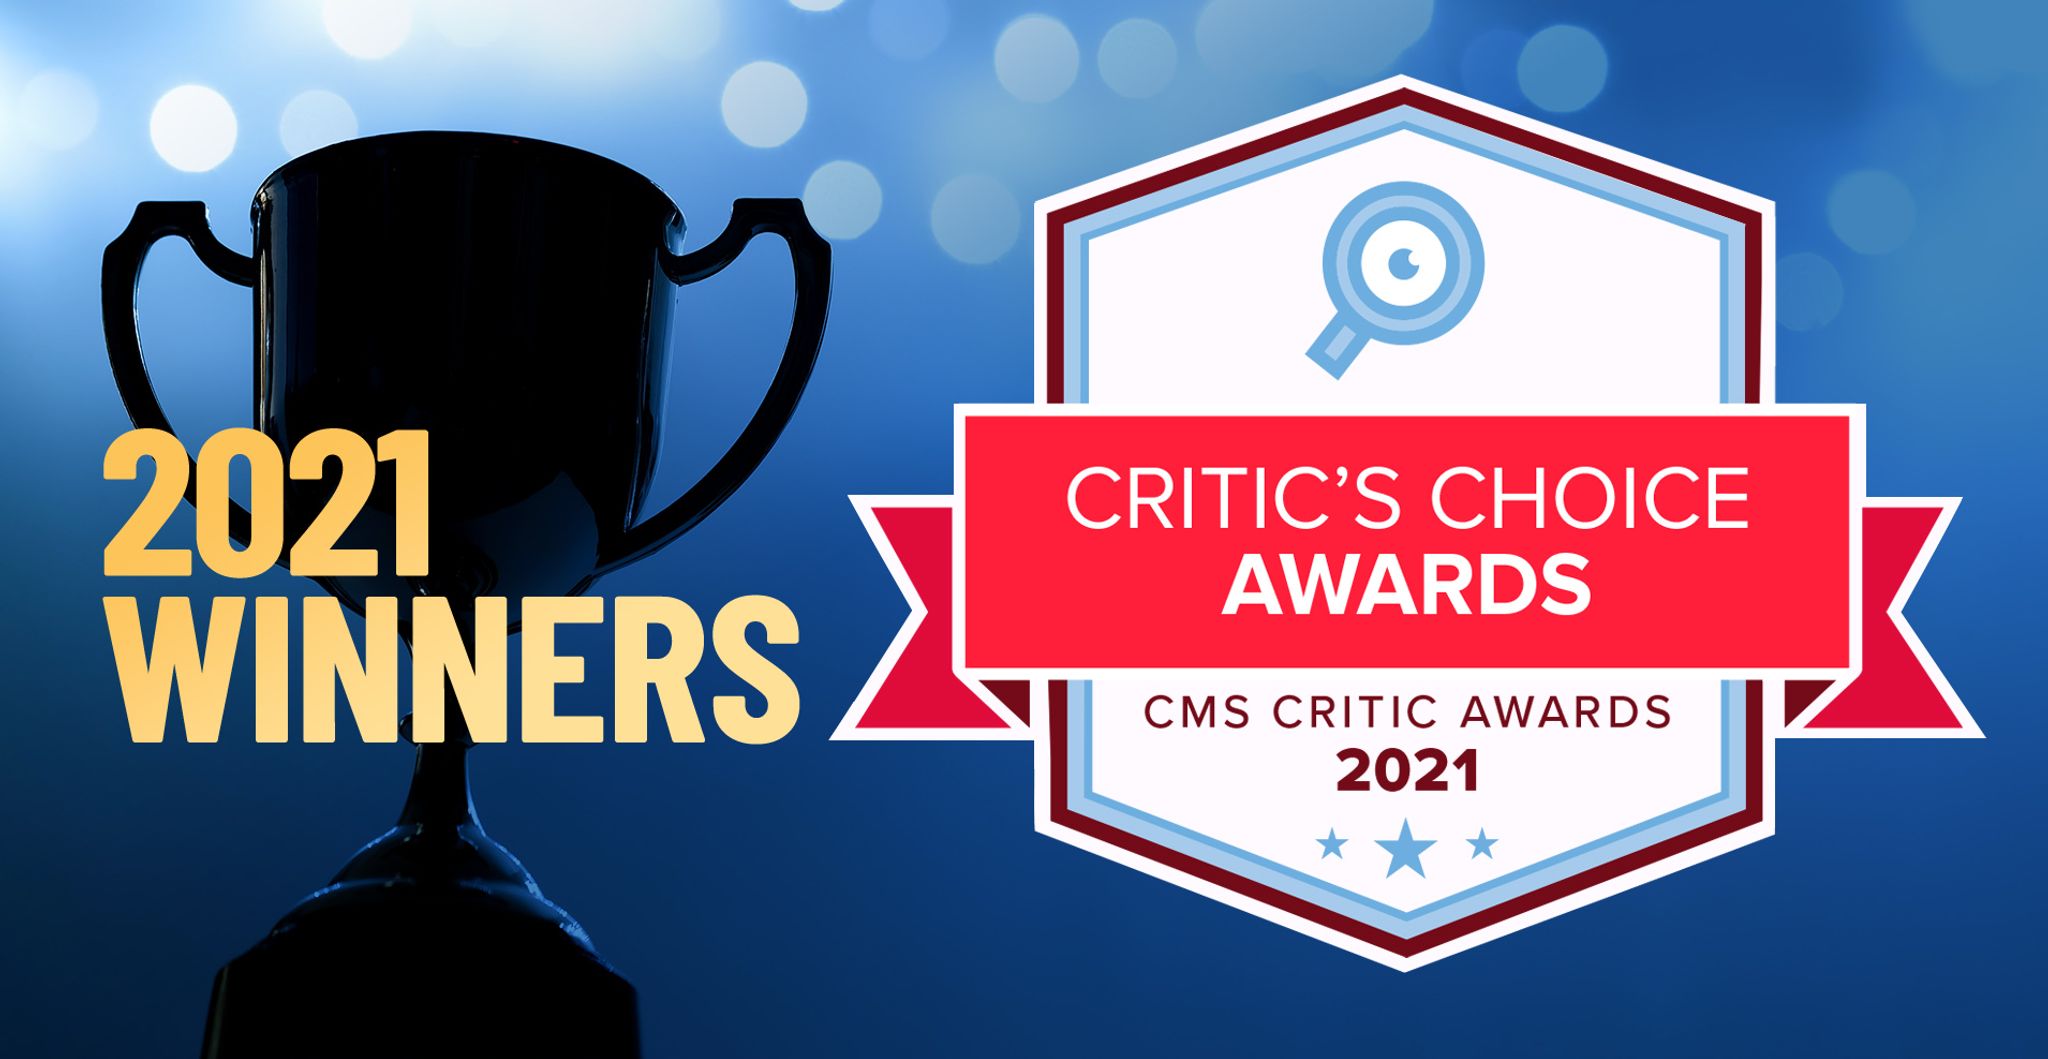 Featured image of the 2021 CMS Critic Critic's Choice Awards badge with text that reads "2021 WInners"